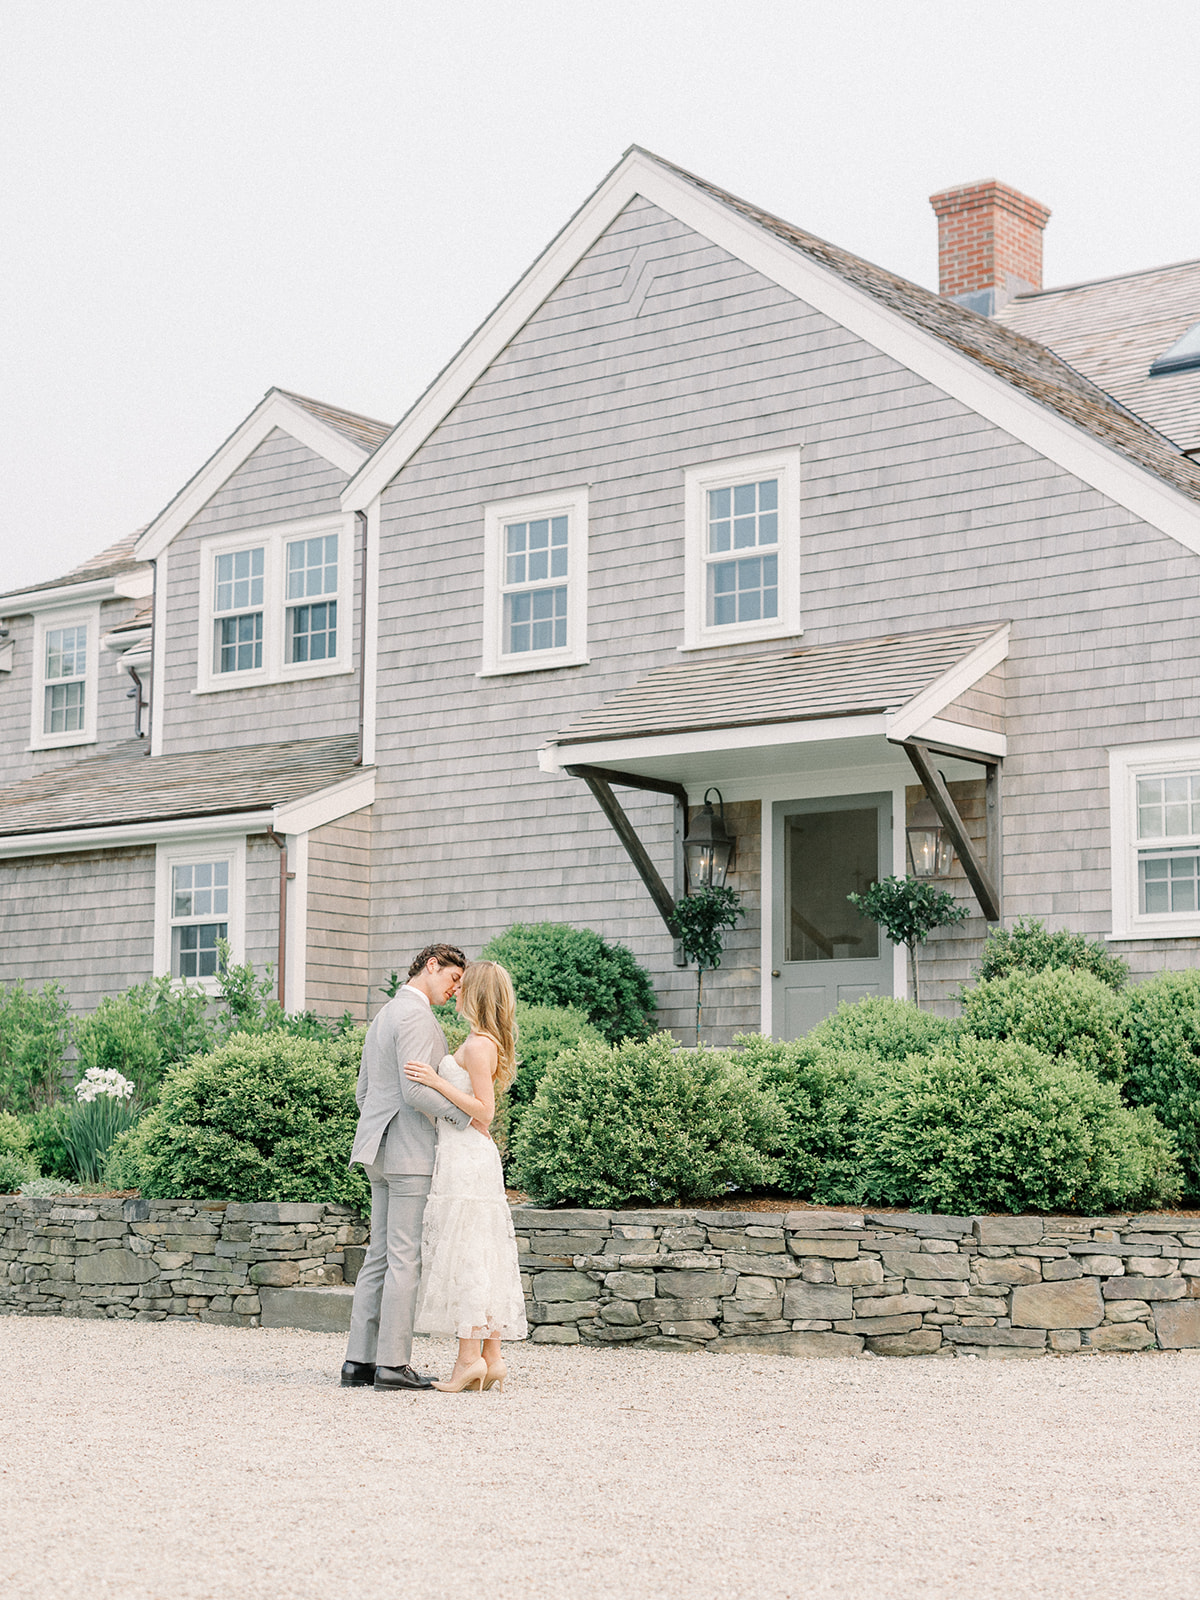 Bride and groom share a kiss at their summer wedding in Nantucket Massachusetts.